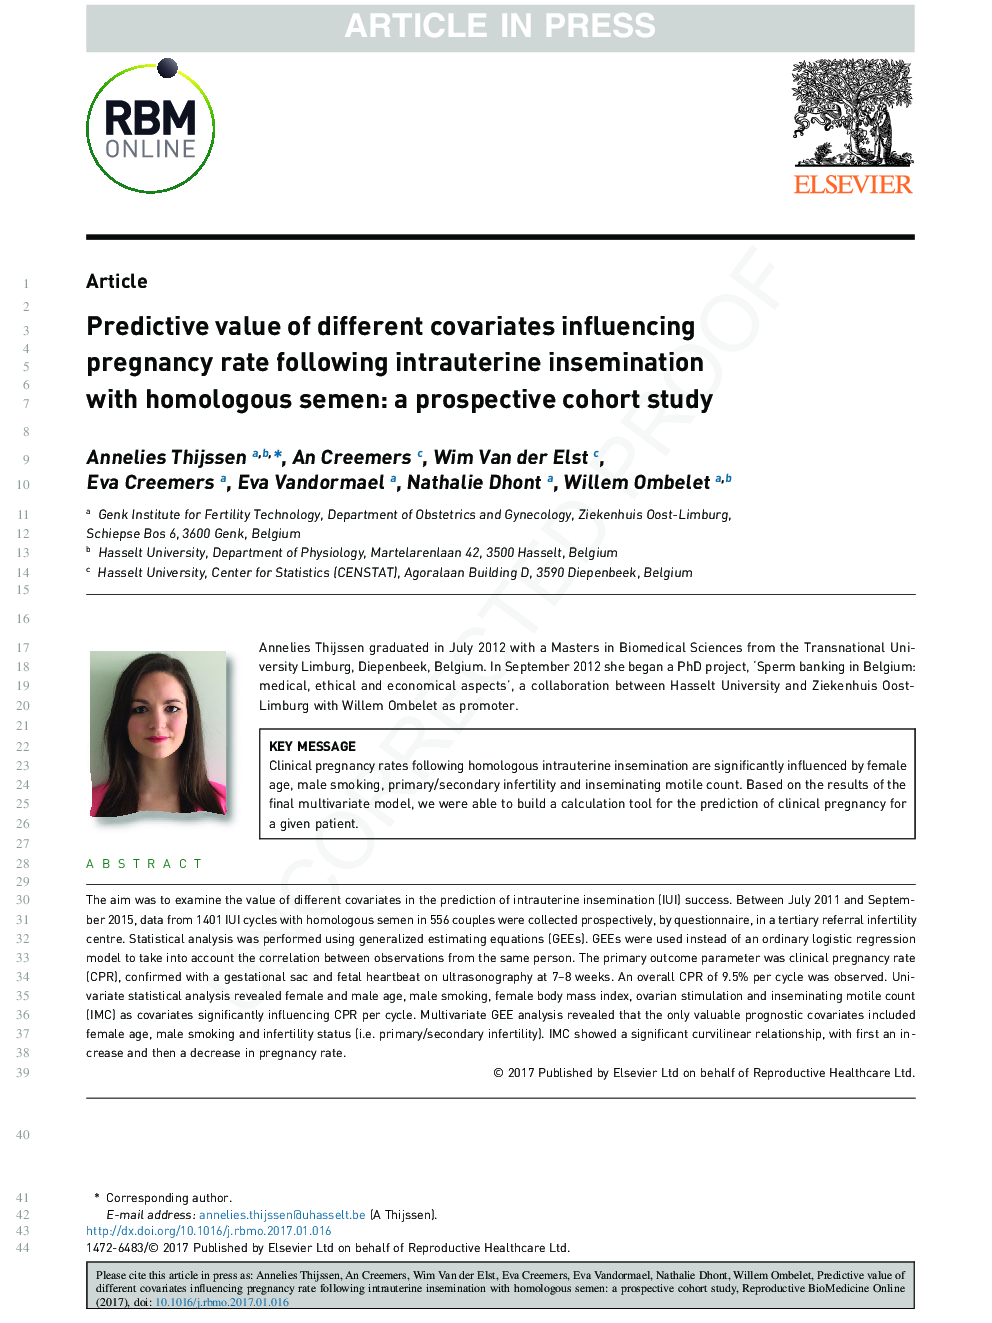 Predictive value of different covariates influencing pregnancy rate following intrauterine insemination with homologous semen: a prospective cohort study